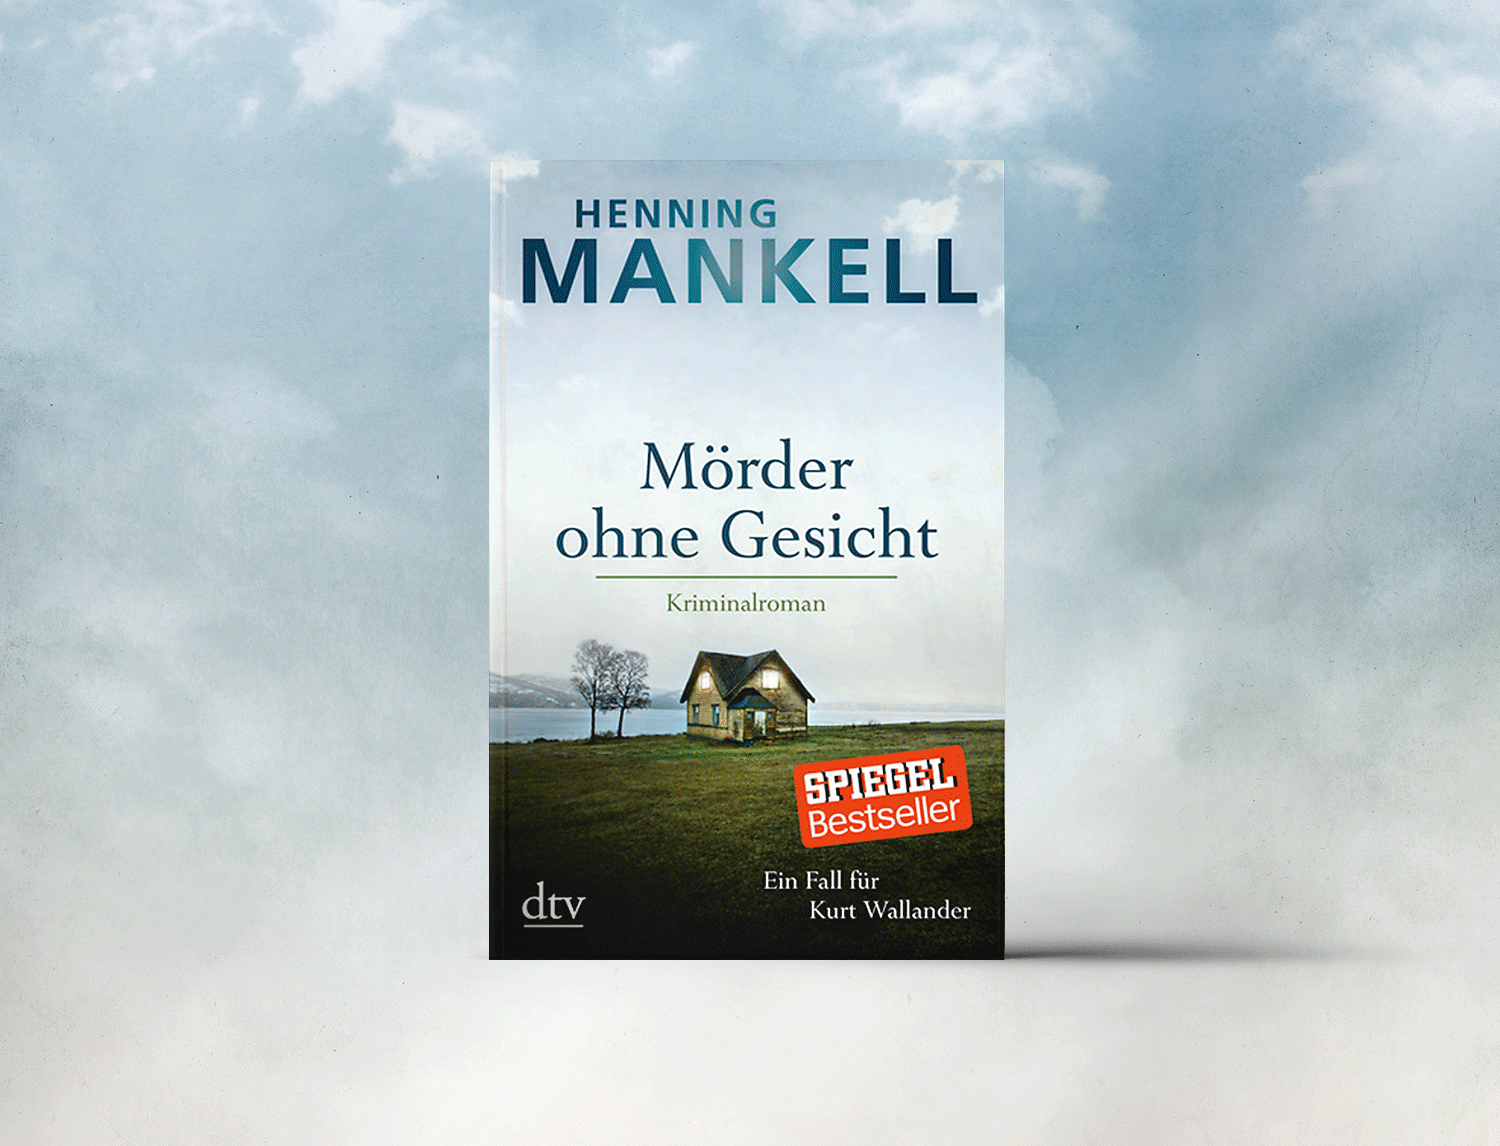 belle_mankell.png